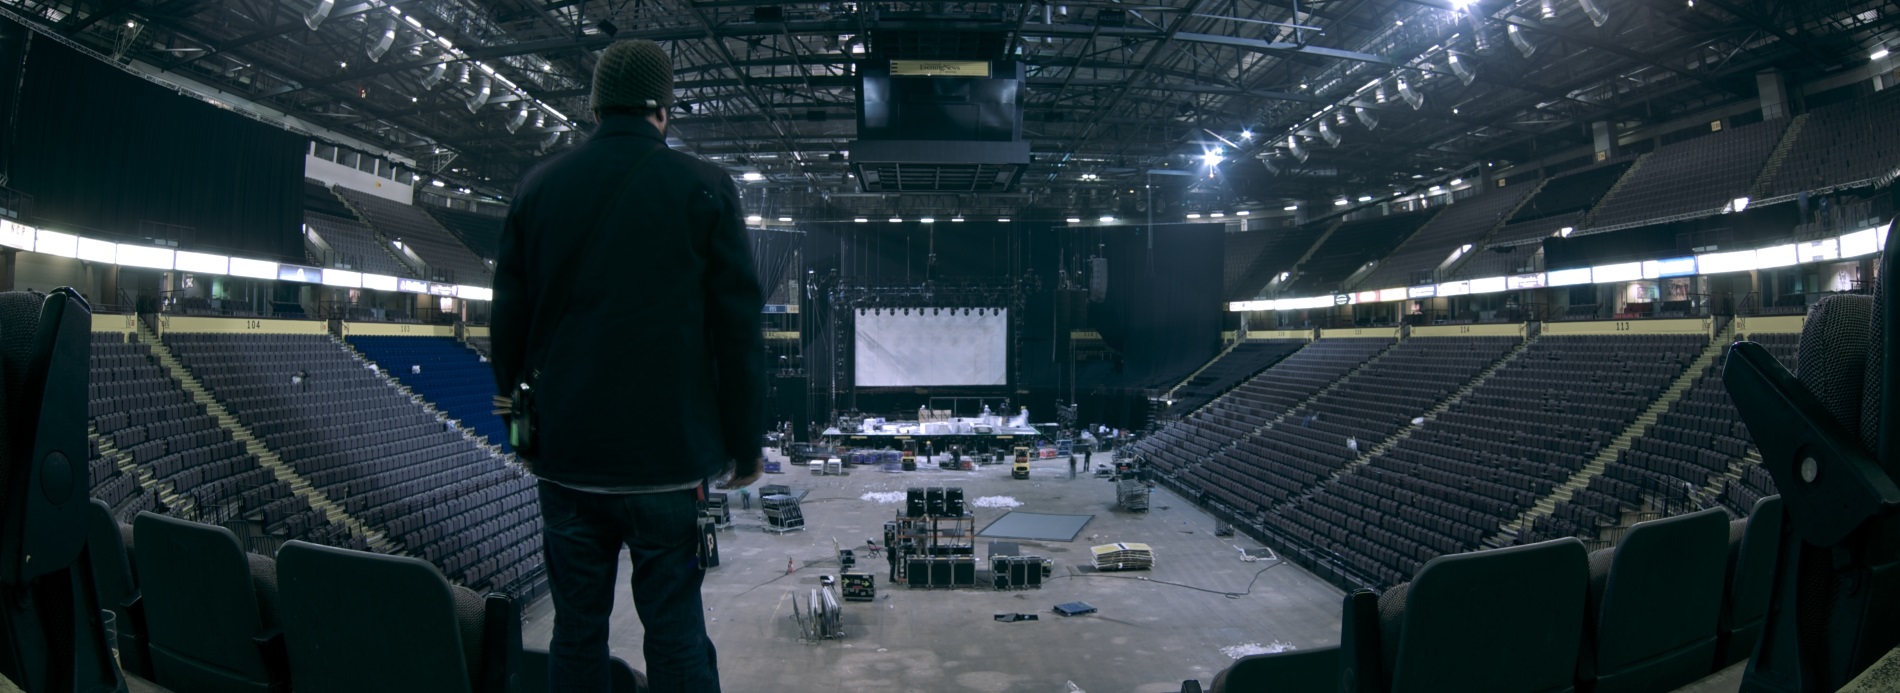 OWA Promos! (CLOSED AS OF 1/14/20) - Page 5 Manchester_arena_panorama_header